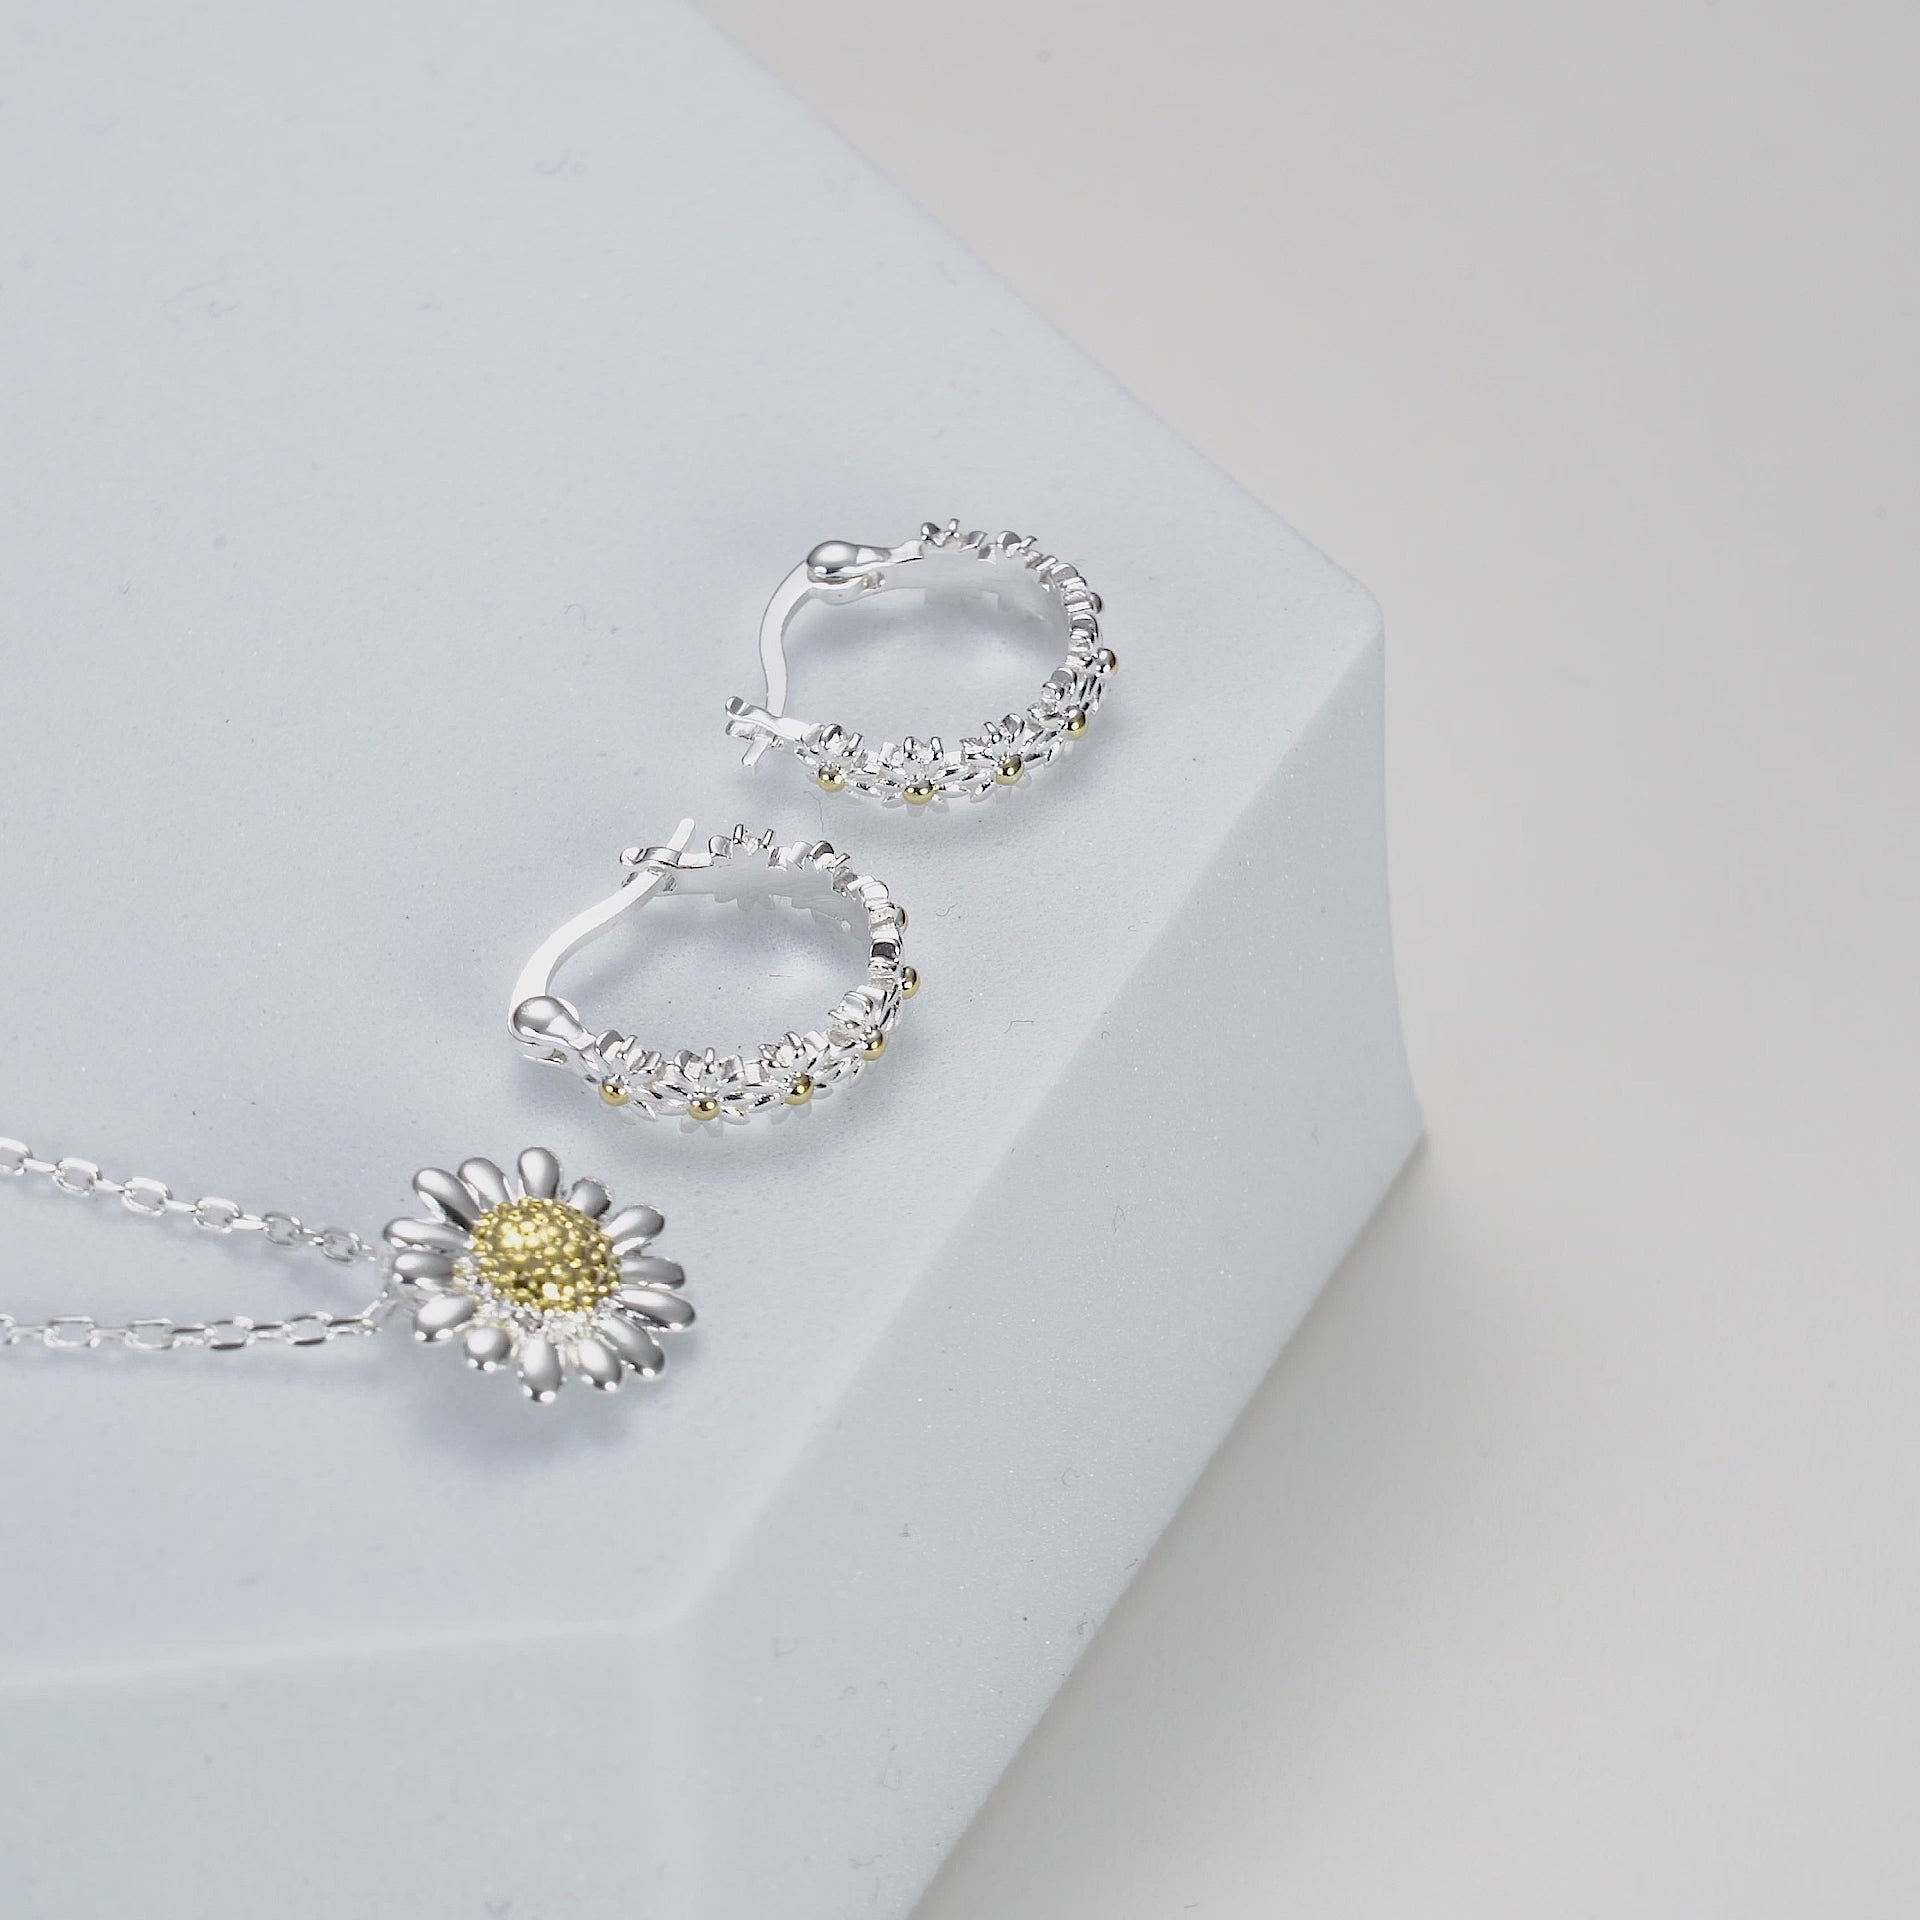 Daisy Necklace and Hoop Earrings Set